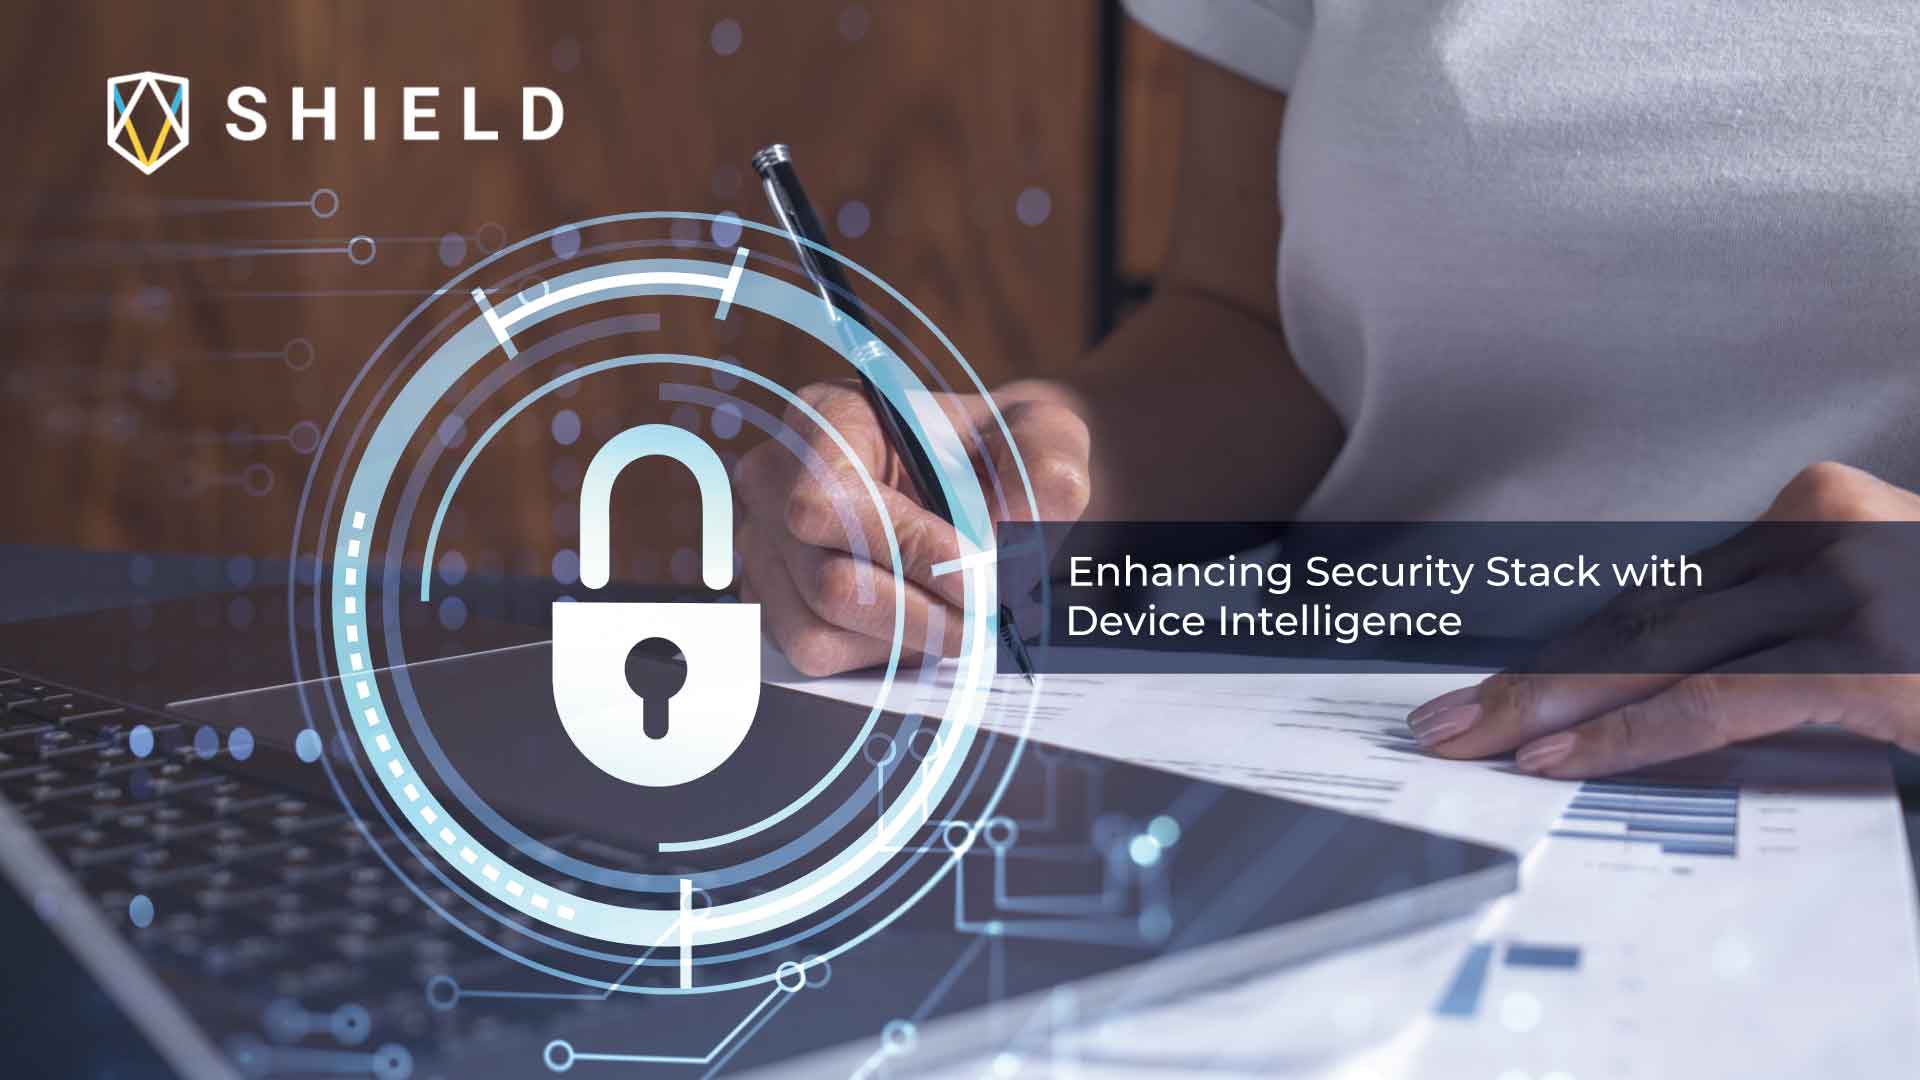 Digital EMI Pioneer ZestMoney Adds SHIELD's Device Intelligence to Enhance its Security Stack